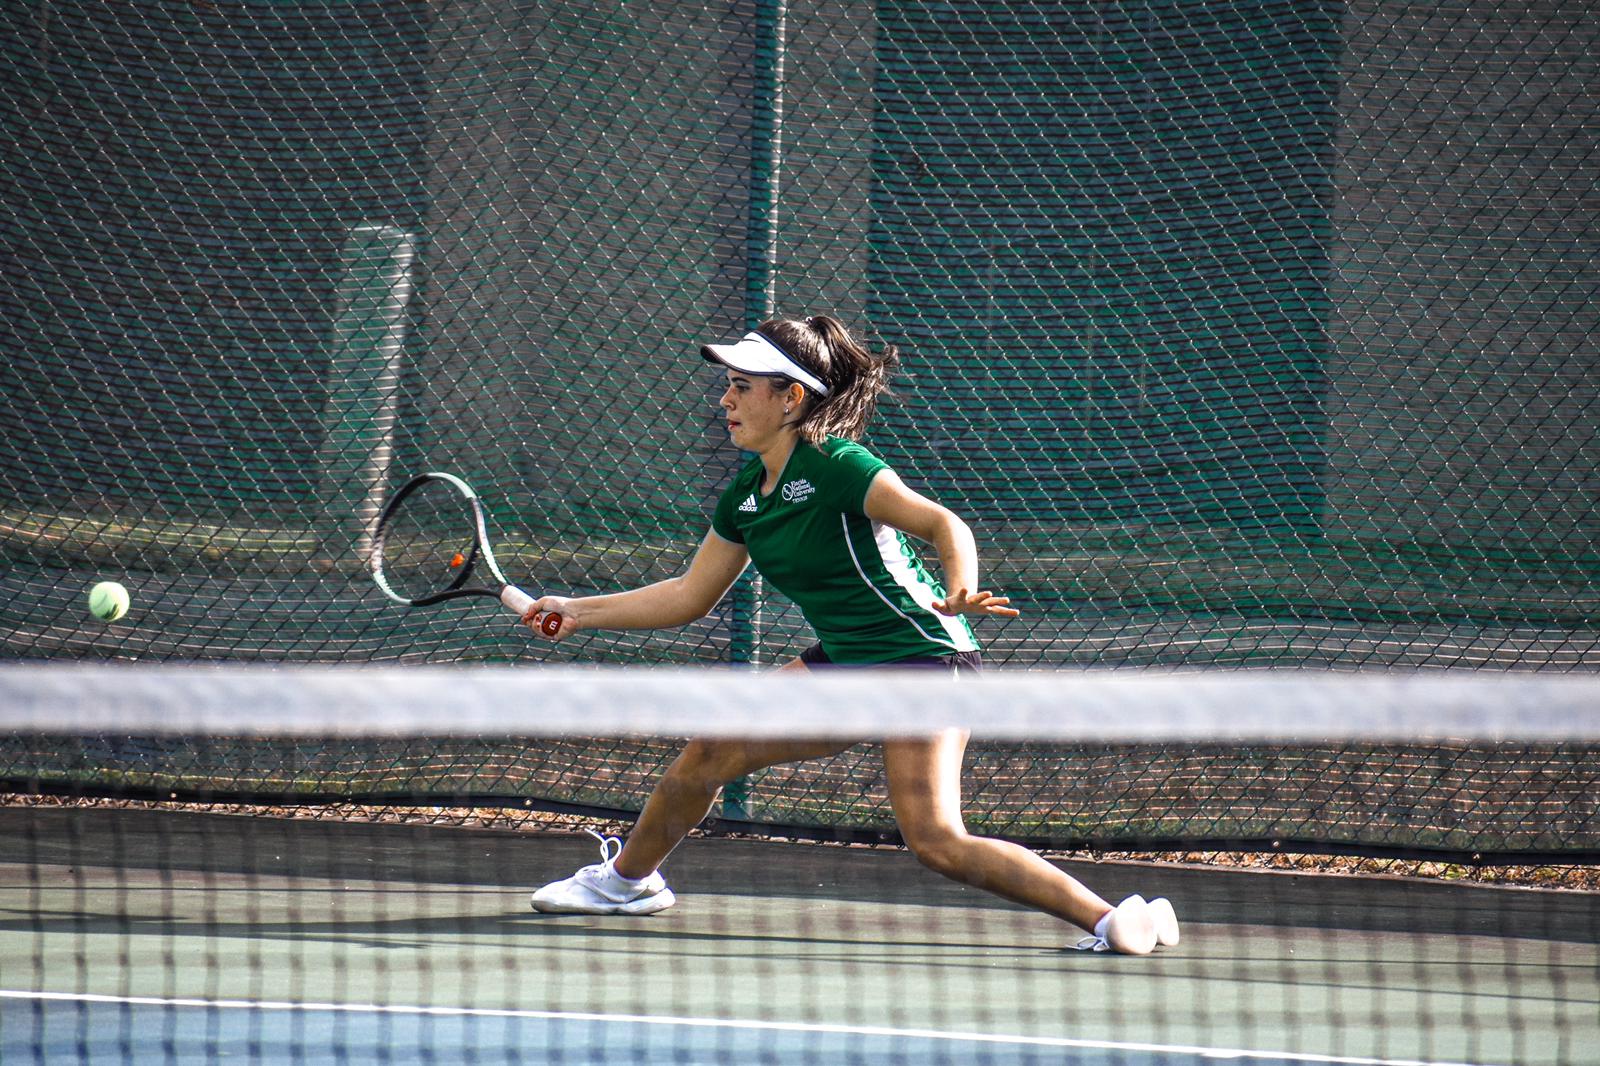 FNU tennis player Candela hitting the ball in the Game